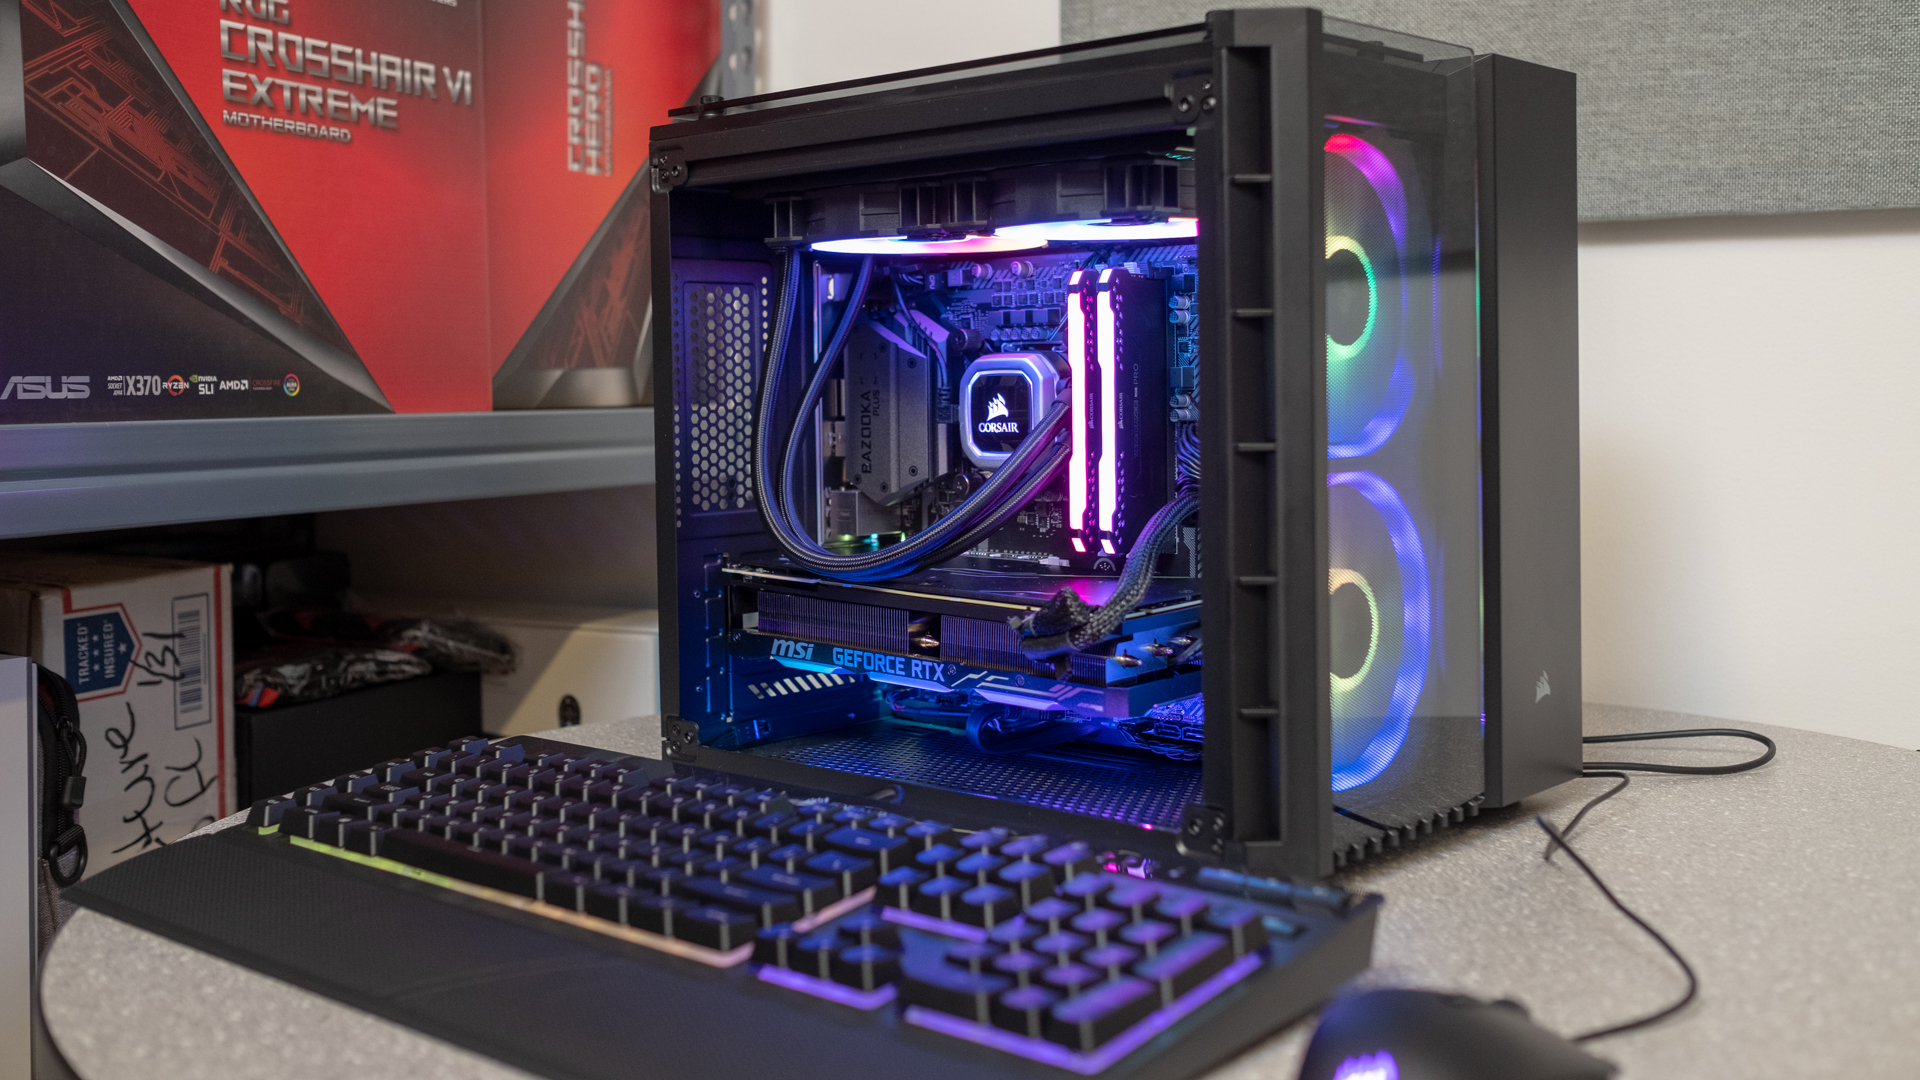 The best gaming PC 2019 10 of the top gaming desktops you can buy